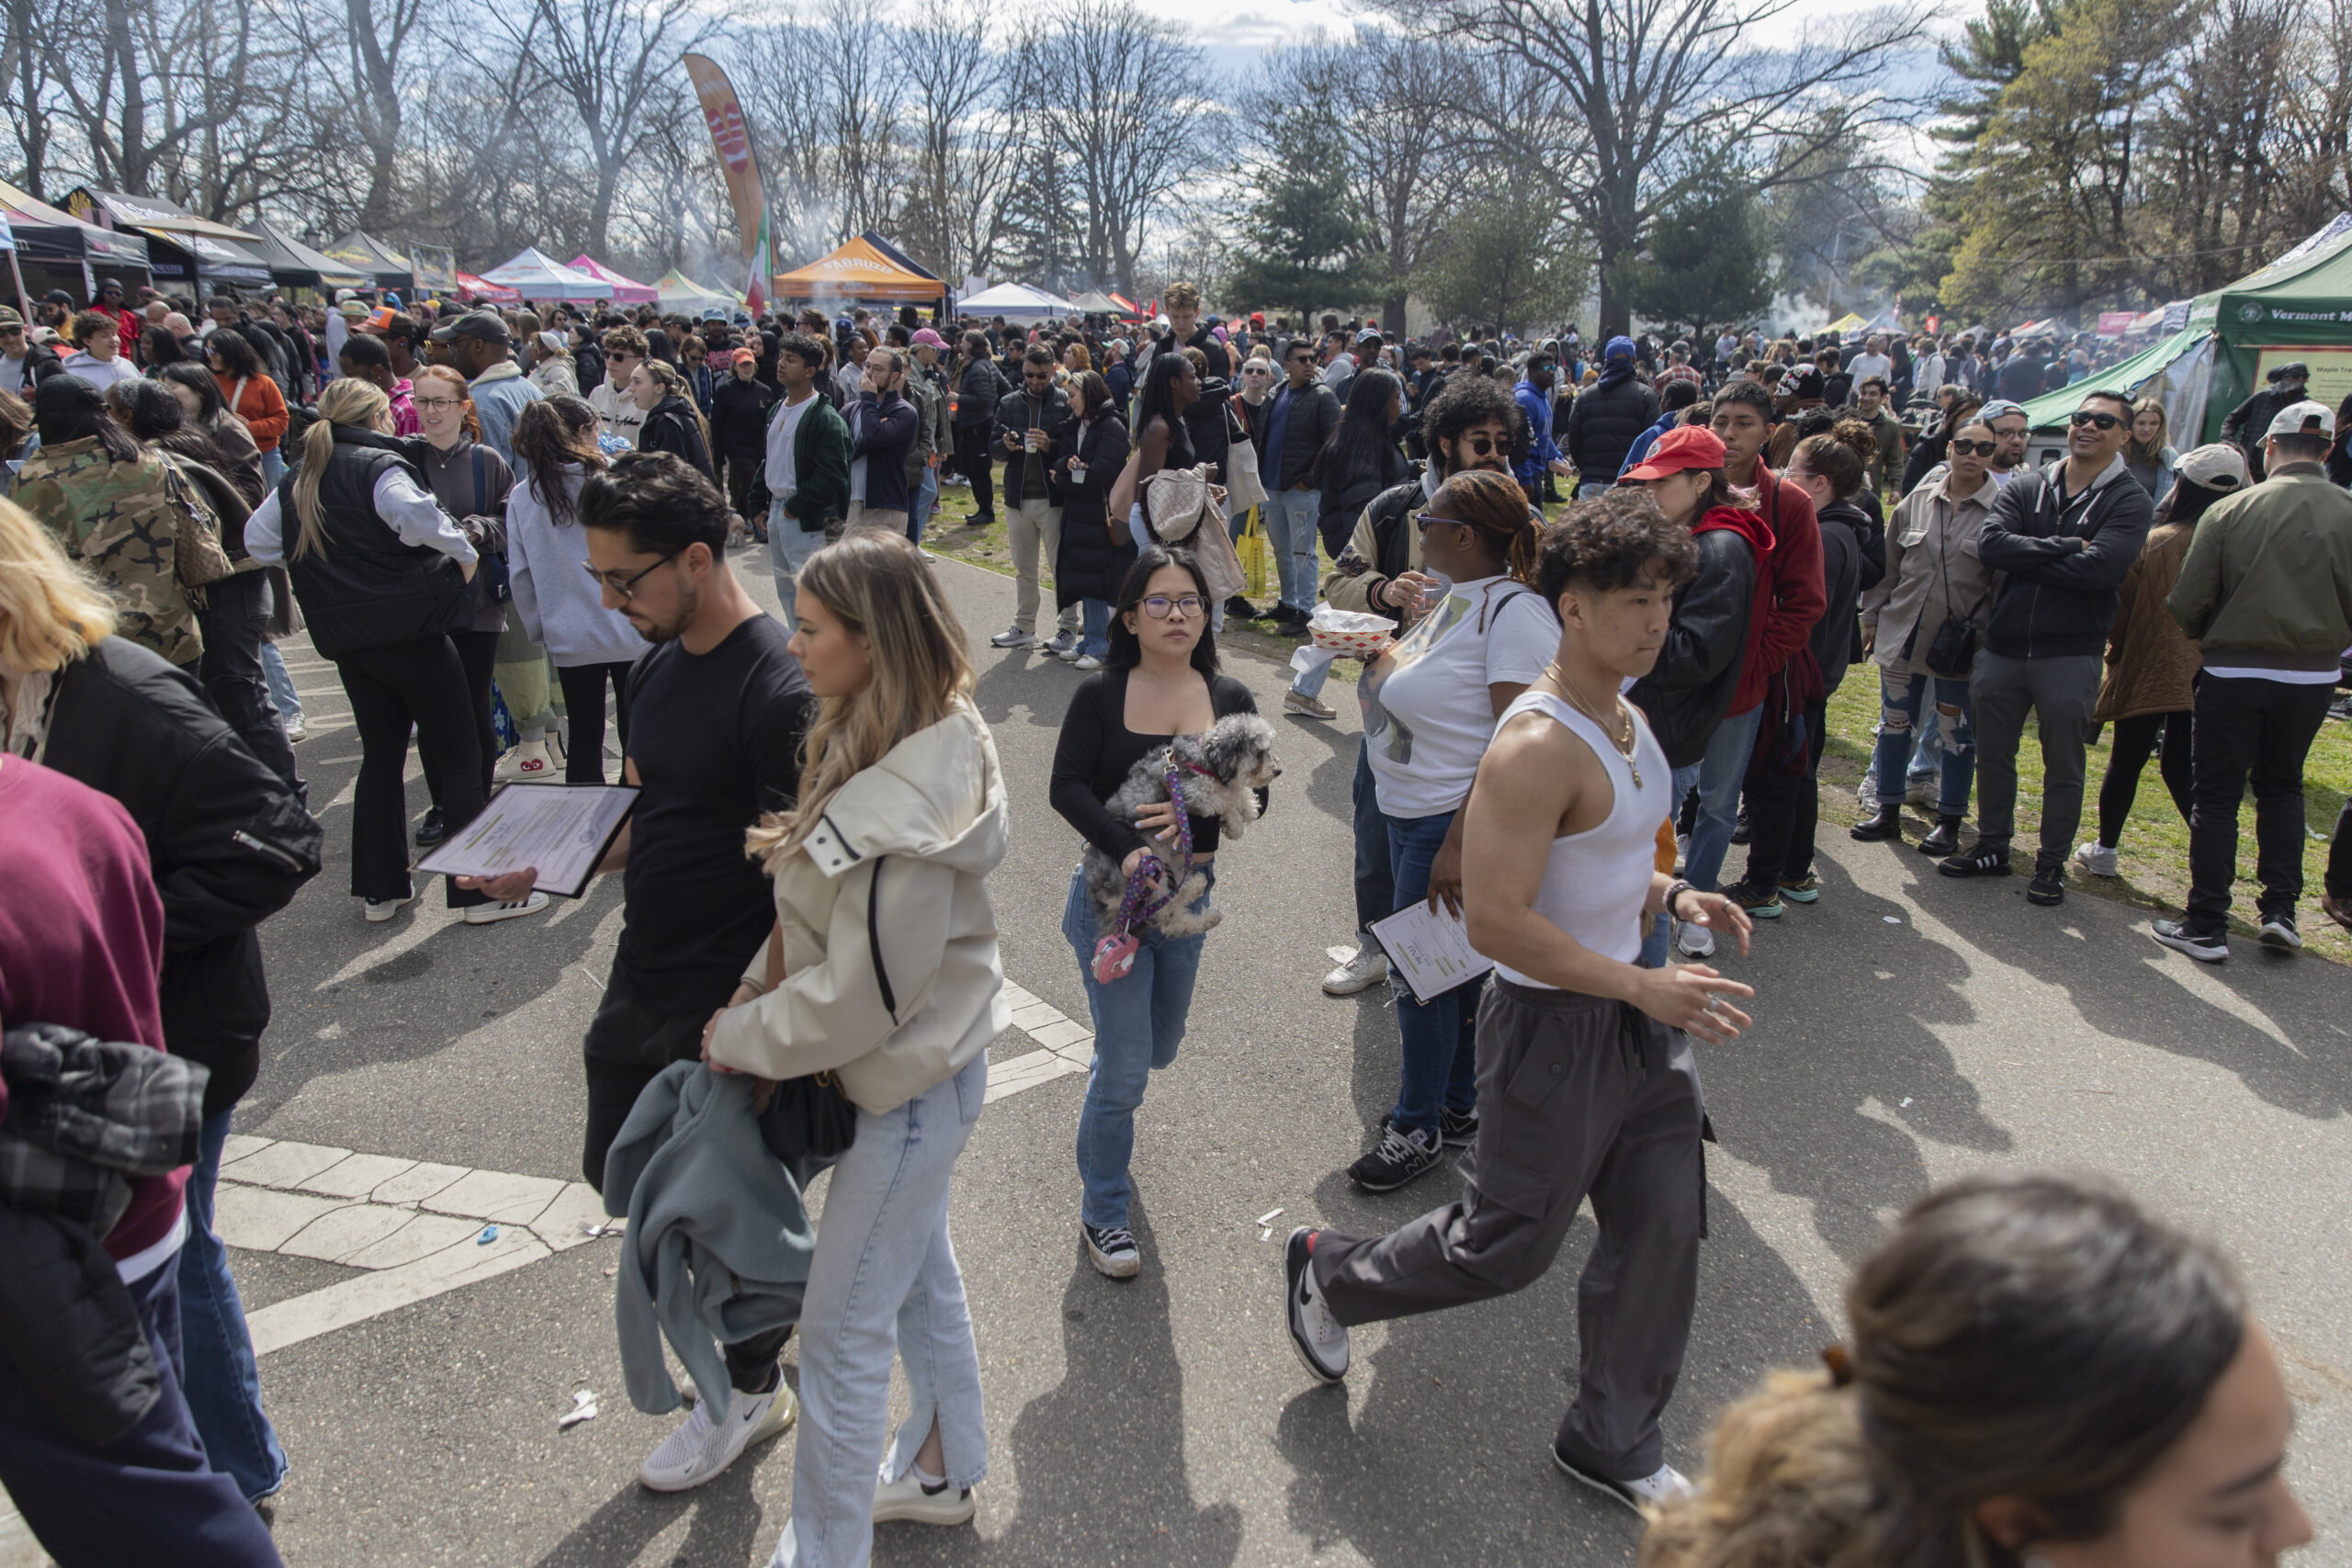 Crowds gather for Smorgasburg in Prospect Park.